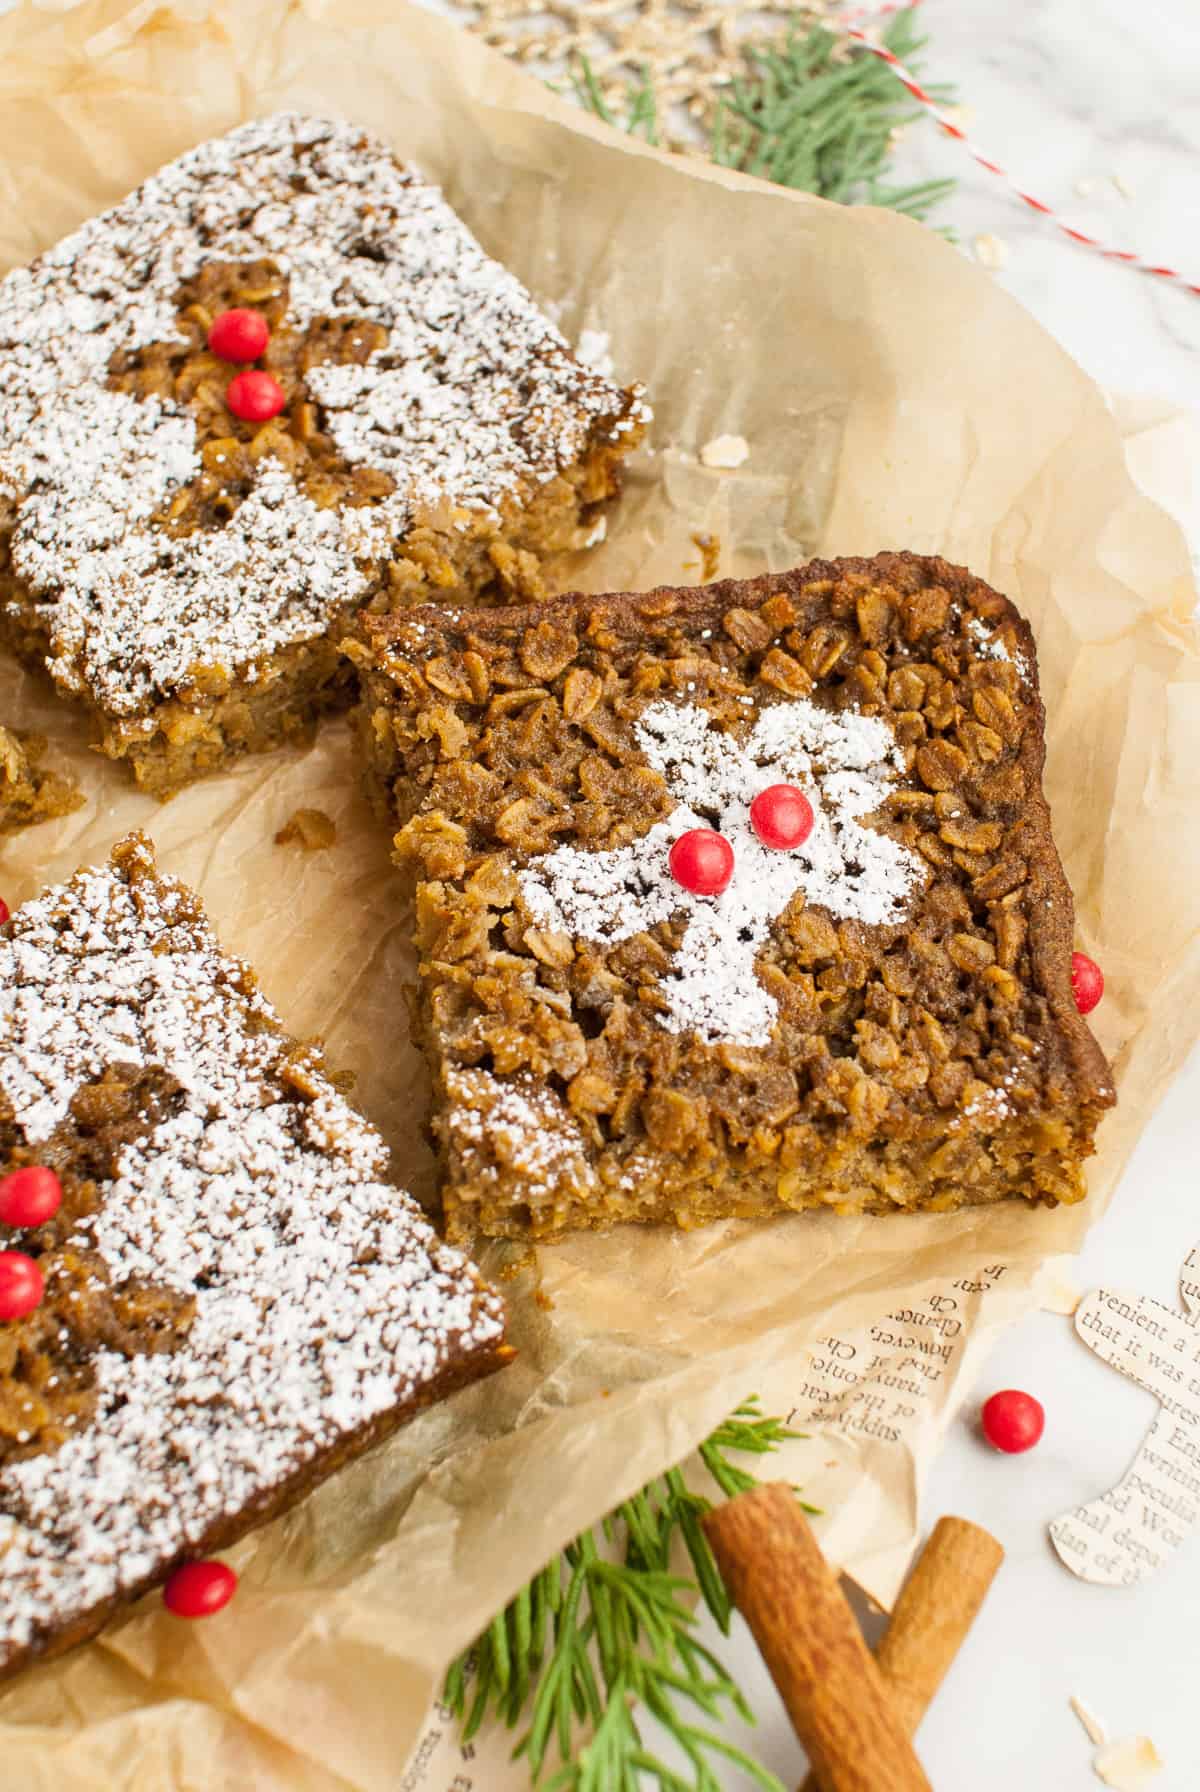 Squares of gingerbread baked oatmeal with powdered sugar dusted on top in gingerbread man cookie shapes.